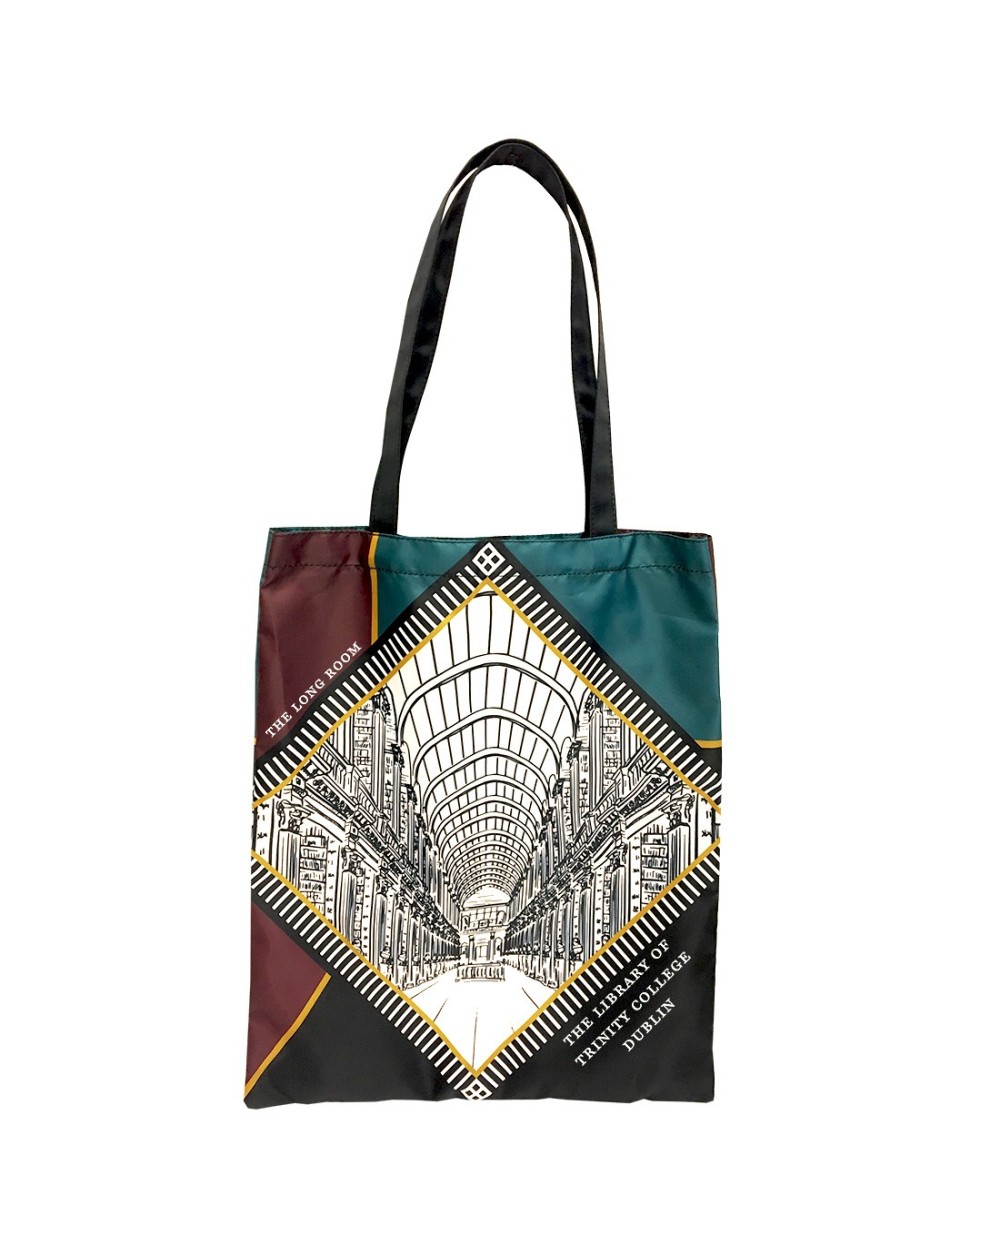 Trinity College Dublin Long Room Architecture Bag